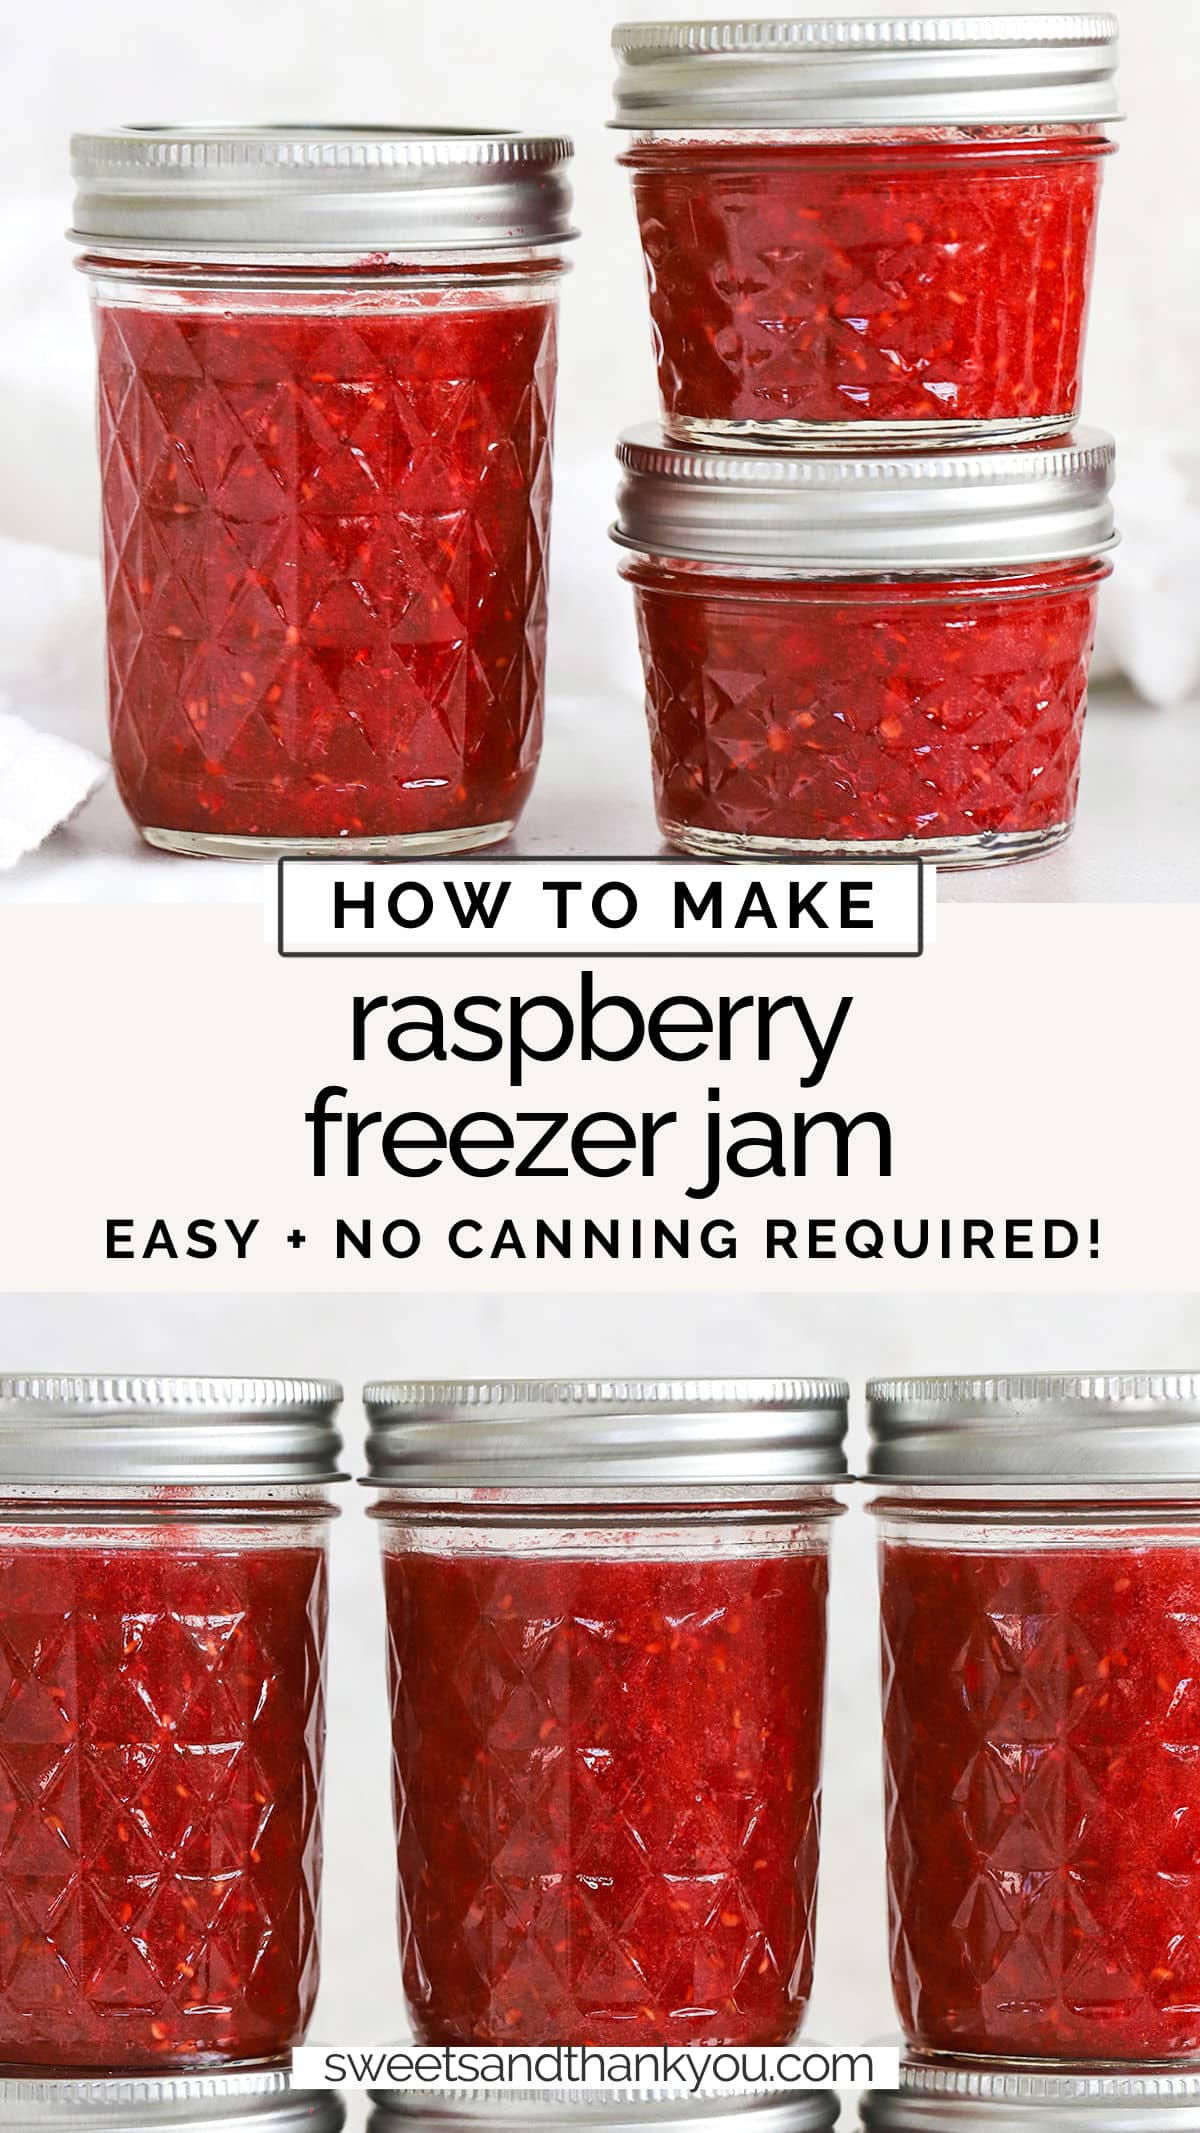 How To Make Low Sugar Raspberry Freezer Jam - This raspberry freezer jam recipe is easier than you think. Made with just 4 ingredients and no canning required! // homemade raspberry jam // homemade raspberry freezer jam recipe // easy freezer jam recipe // easy raspberry jam // low sugar raspberry jam recipe // reduced sugar raspberry jam recipe / low sugar raspberry freezer jam recipe / how to make raspberry freezer jam step by step /